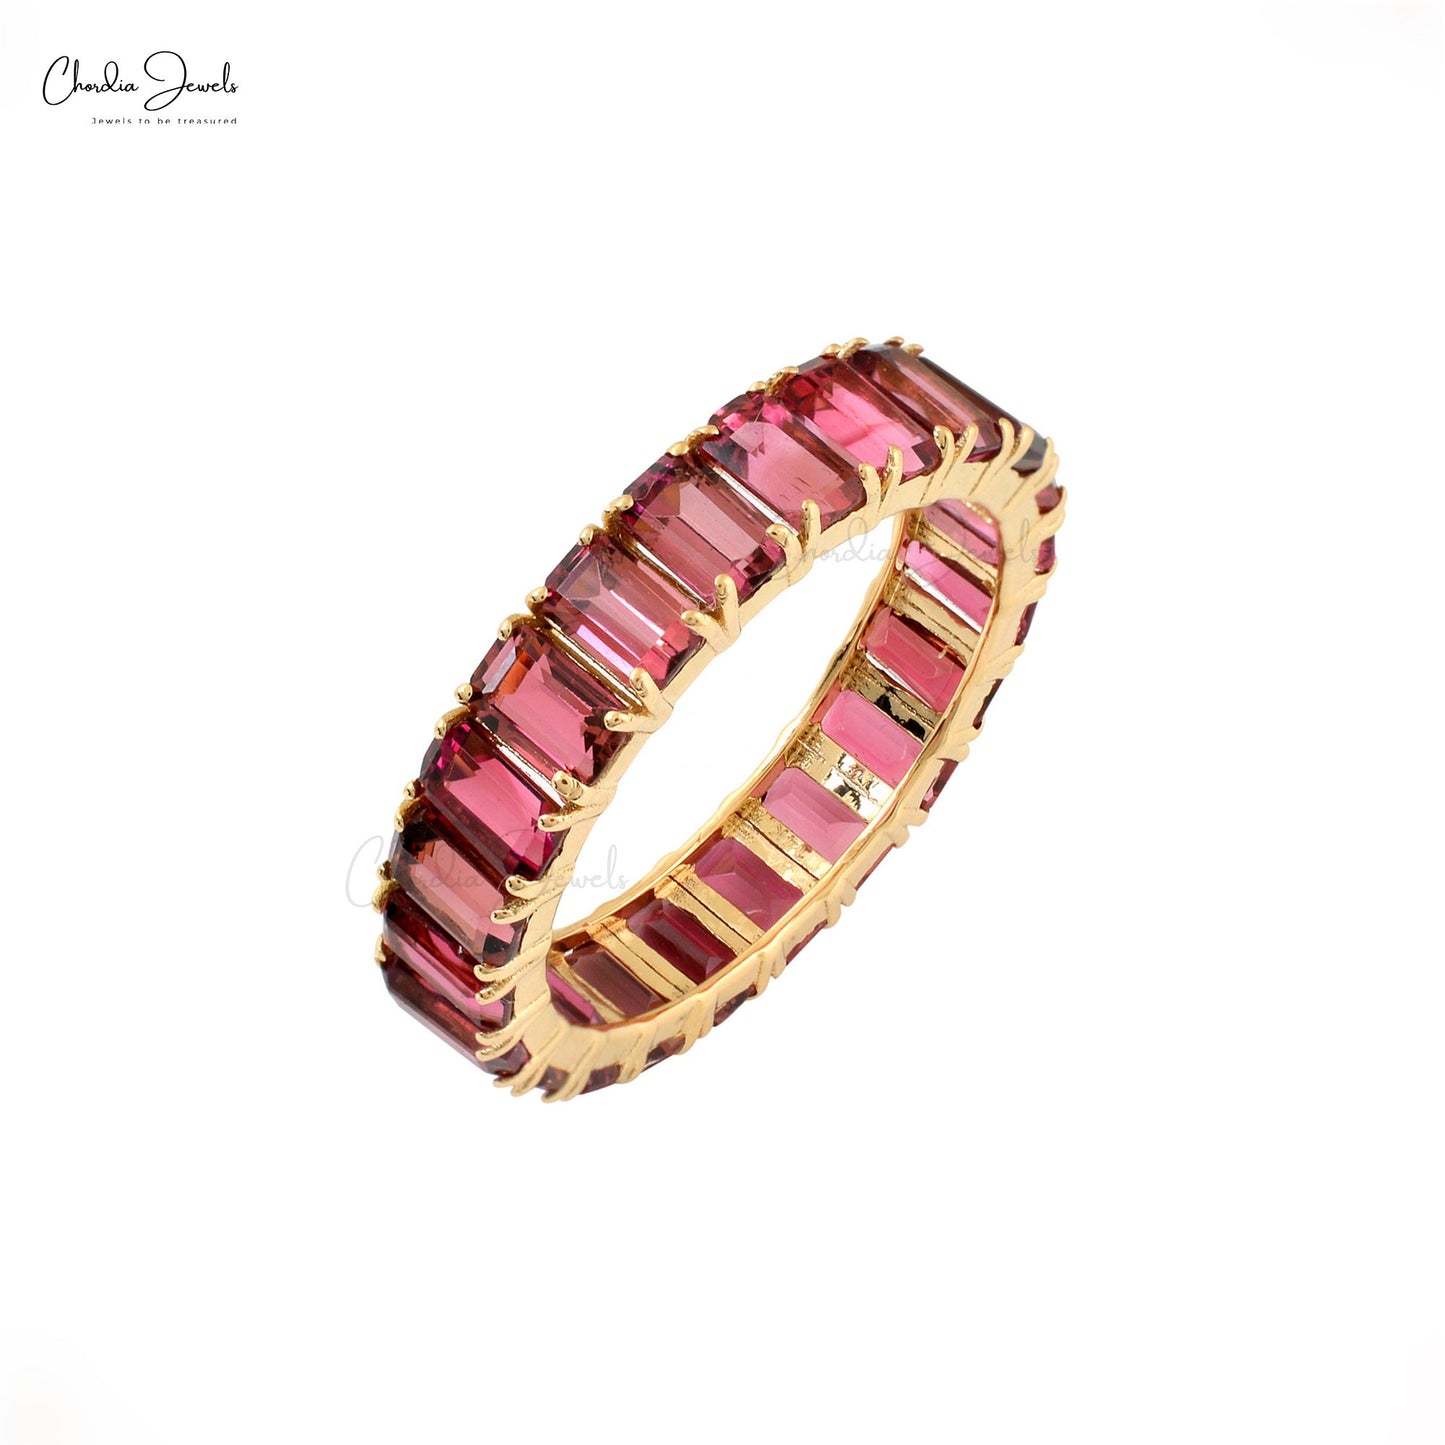 Load image into Gallery viewer, Pink Tourmaline Eternity Band Ring October Birthstone, 5x3mm Octagon Cut Pink Tourmaline Ring Band For Her, 6.65 Carat Natural Gemstone Ring For Gift, 14k Solid Yellow Gold Ring Gift For Her
